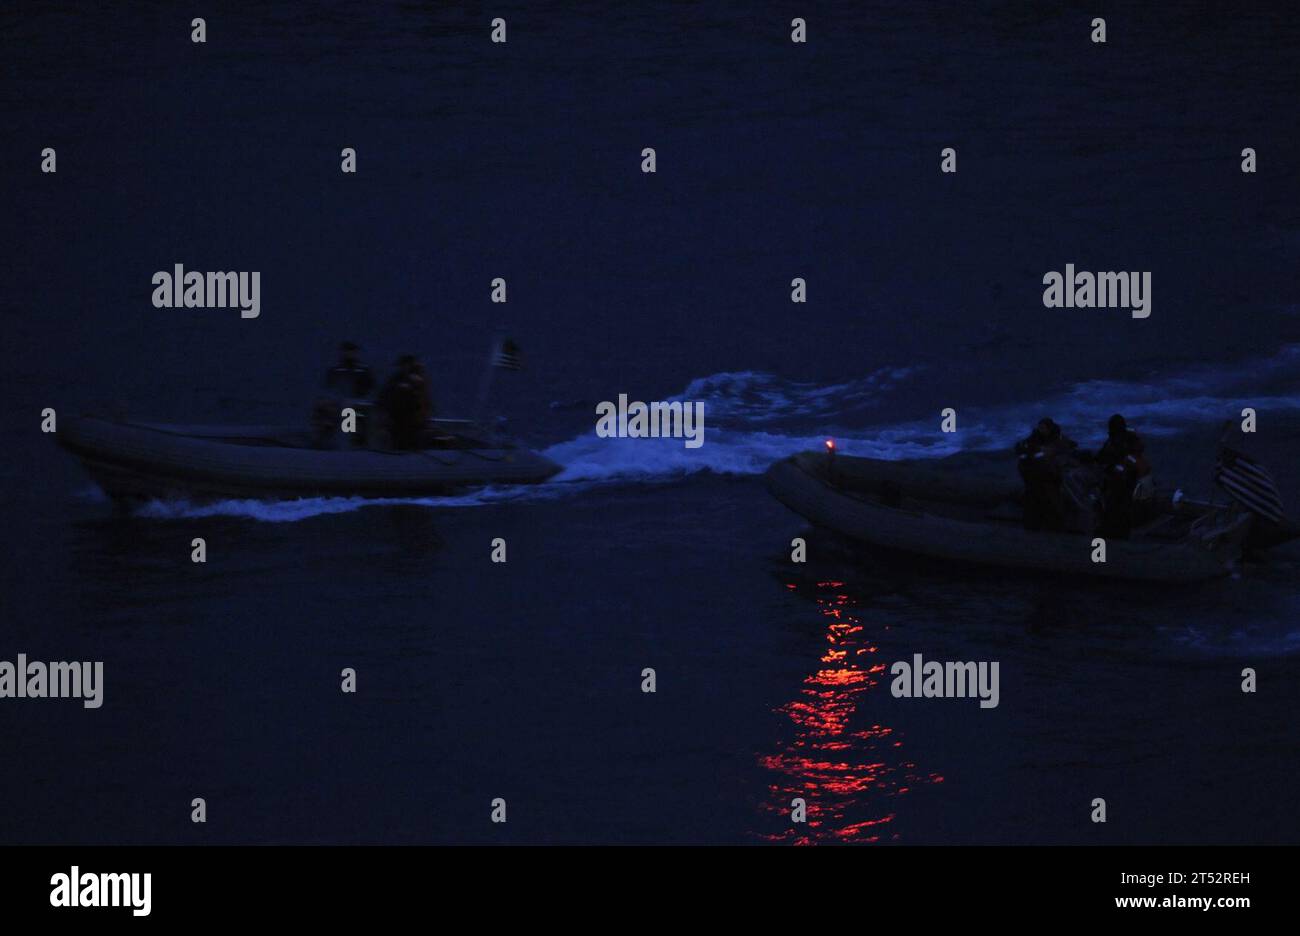 1003187280V-329  BUSAN, Republic of Korea (March 18, 2010) Sailors assigned to the U.S. 7th Fleet command ship USS Blue Ridge (LCC 19) conduct nighttime small-boat attack force protection drills in the harbor of Busan, Republic of Korea. Navy Stock Photo